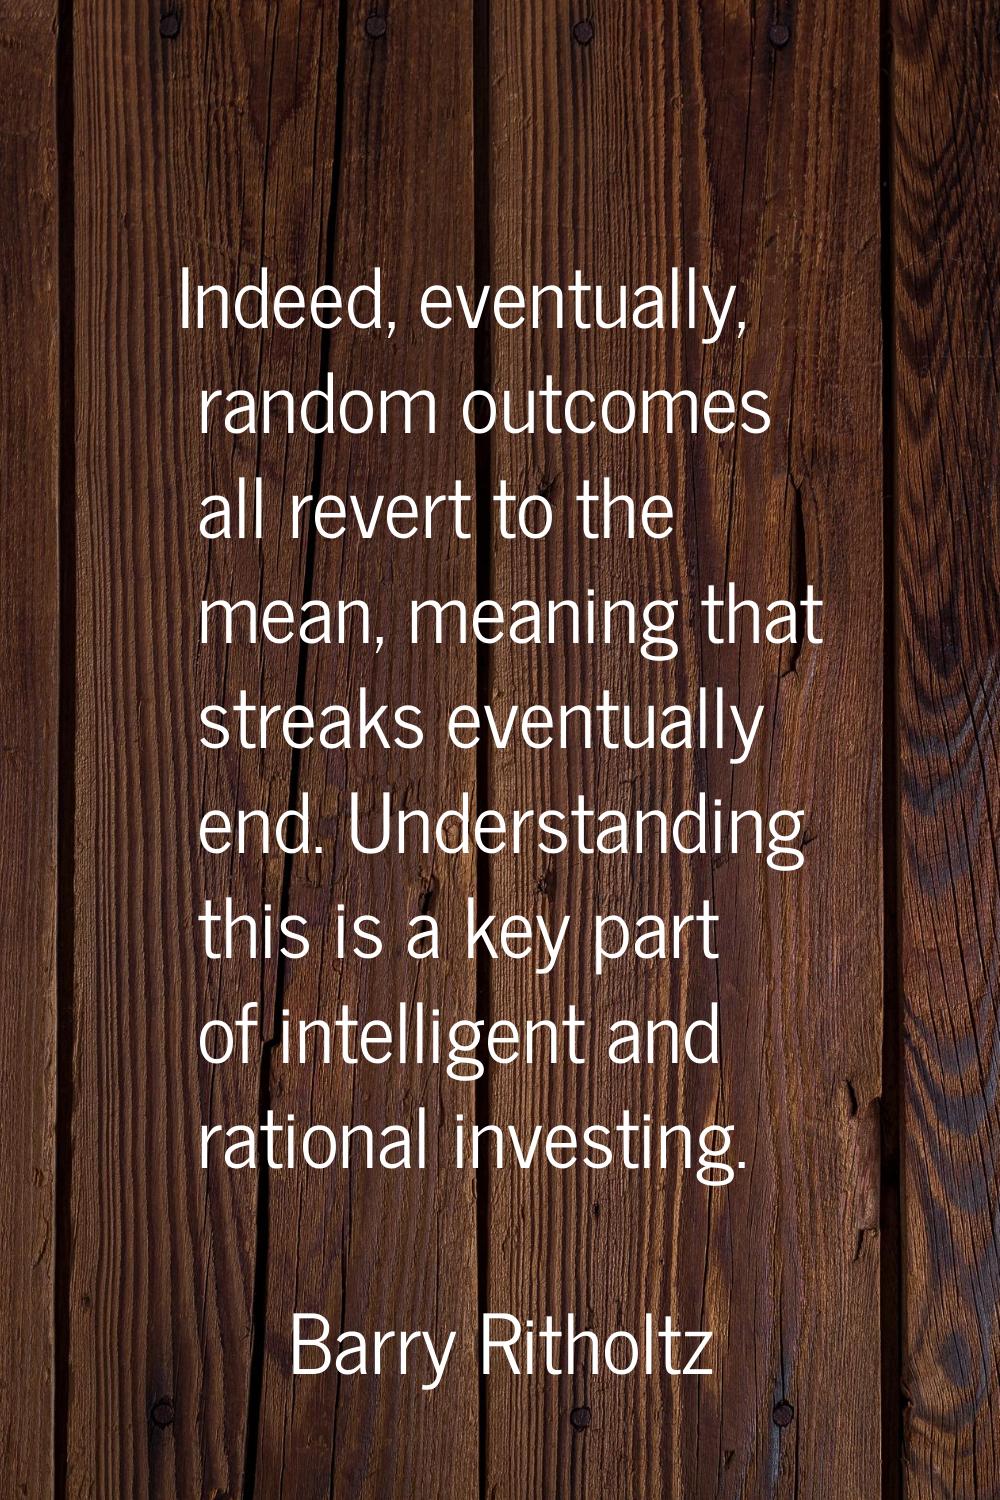 Indeed, eventually, random outcomes all revert to the mean, meaning that streaks eventually end. Un